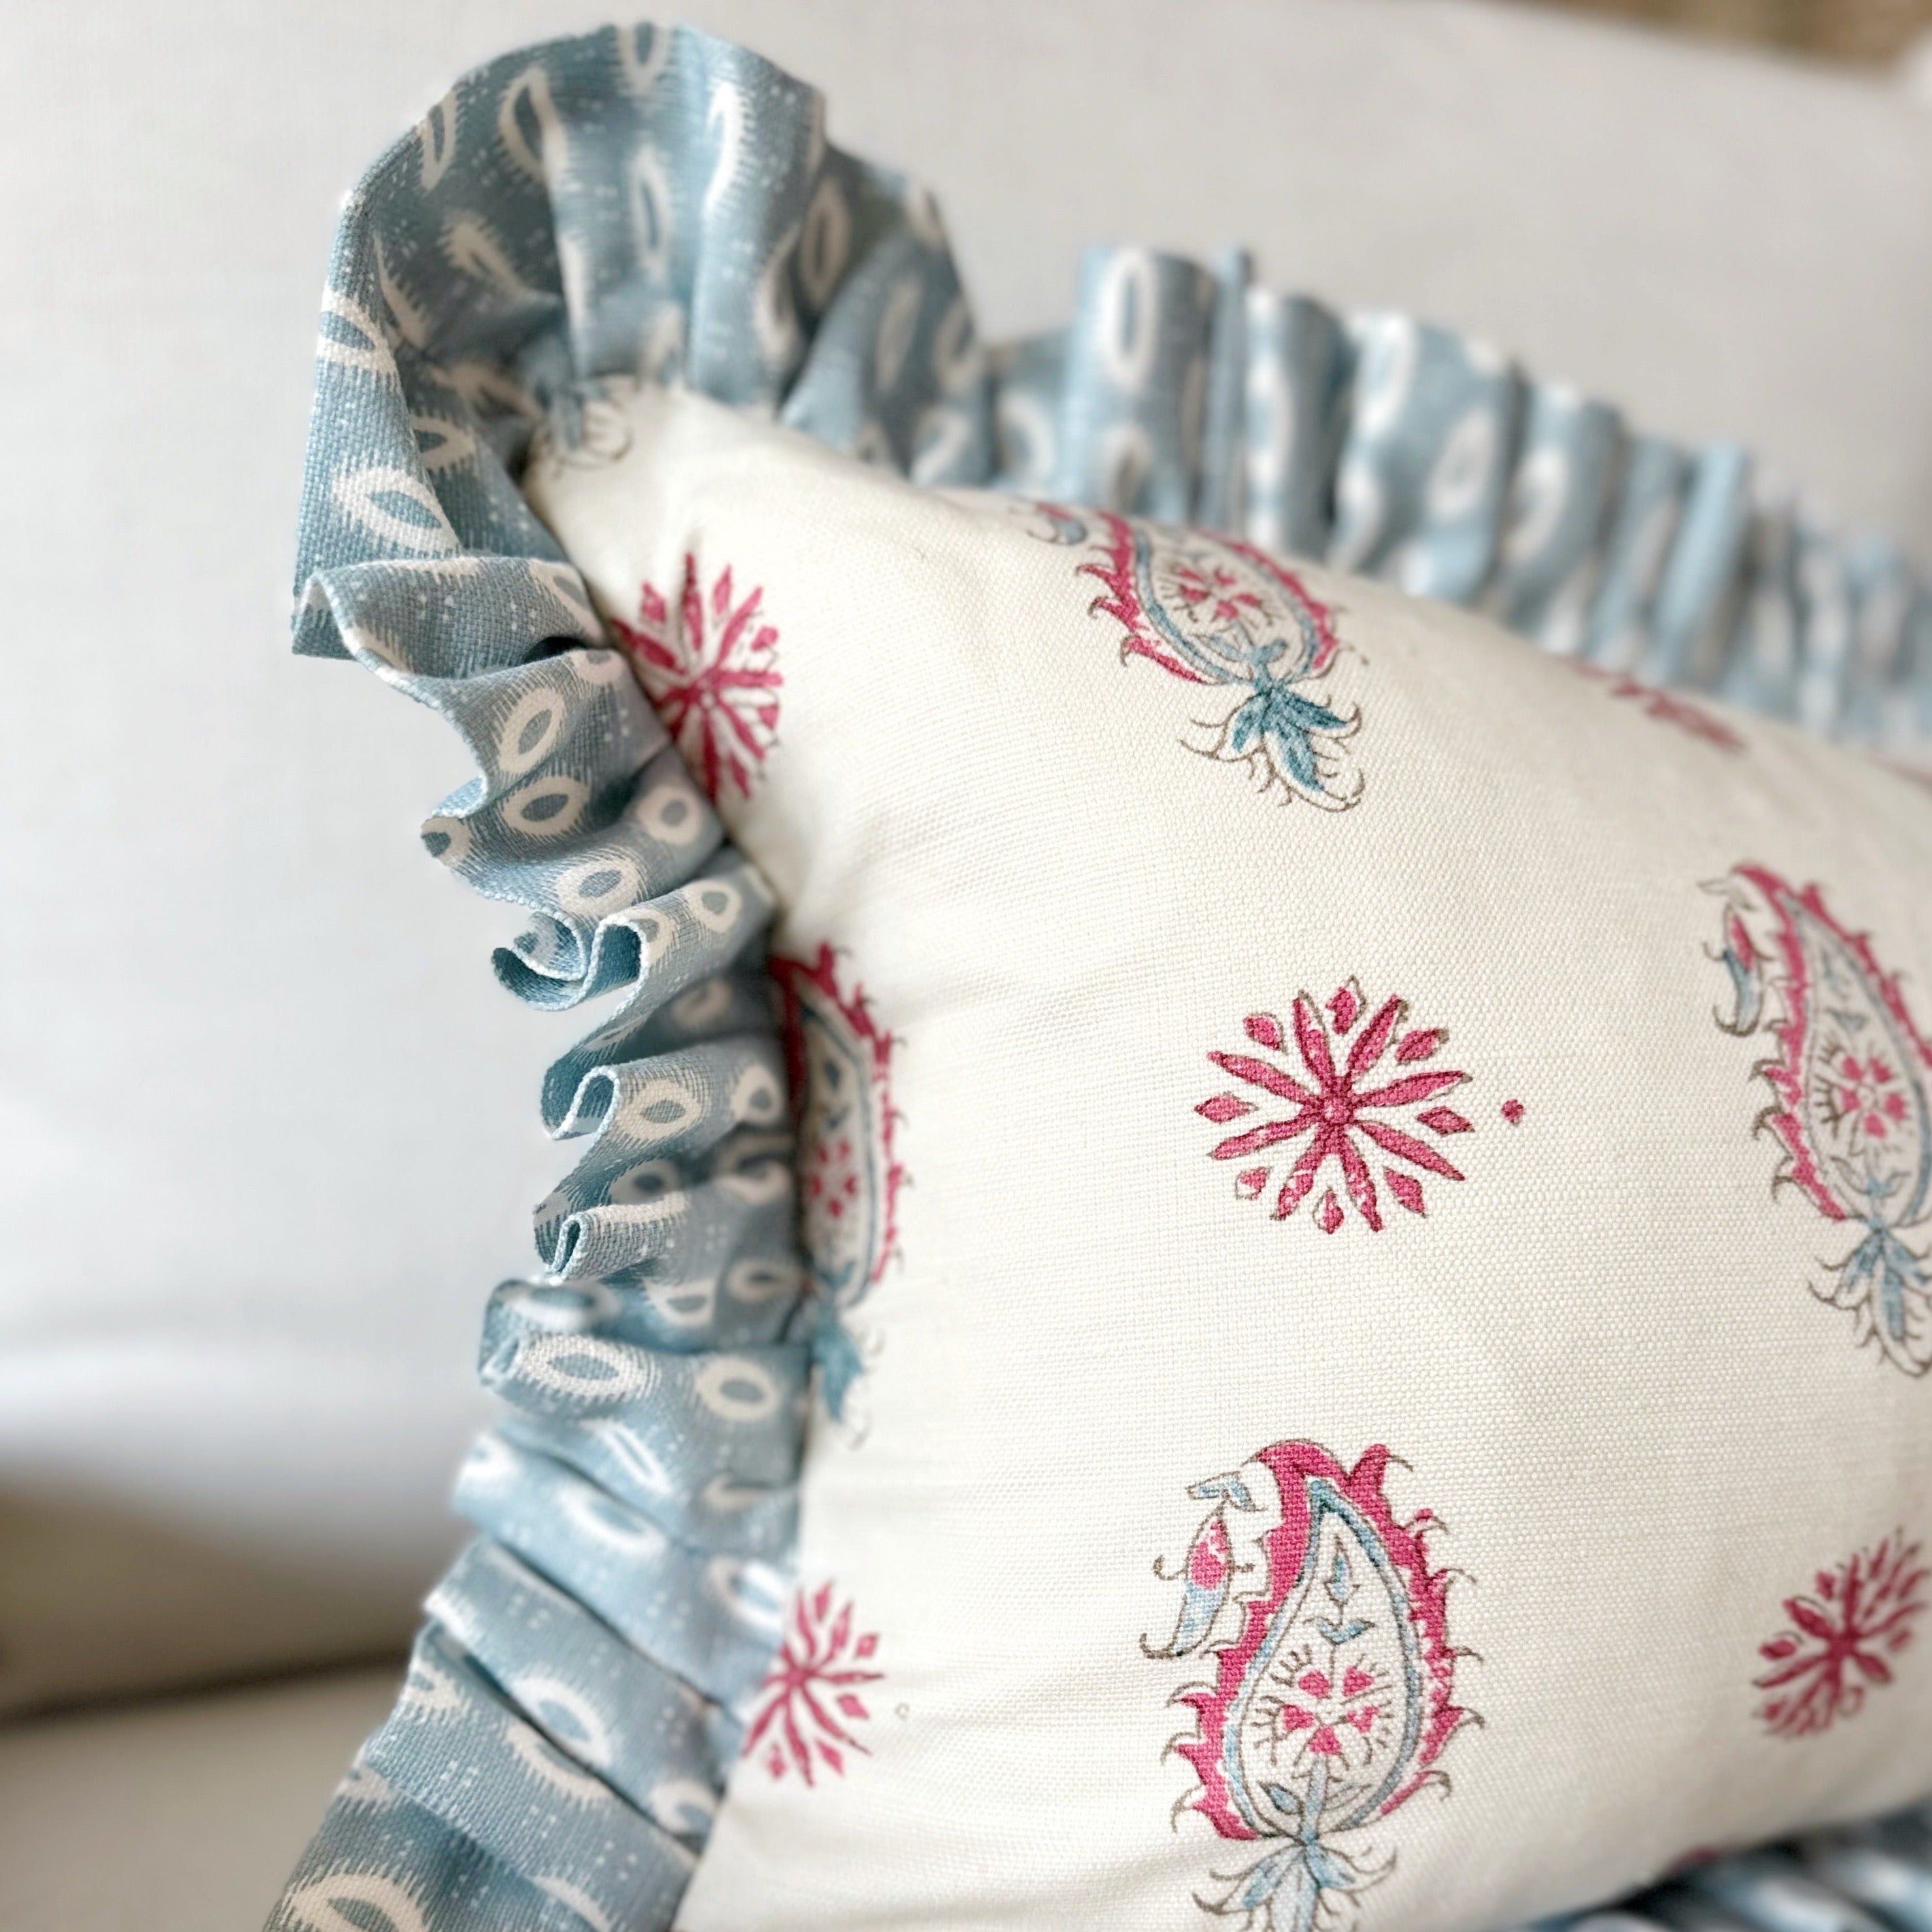 Paisley cushion cover with ruffle